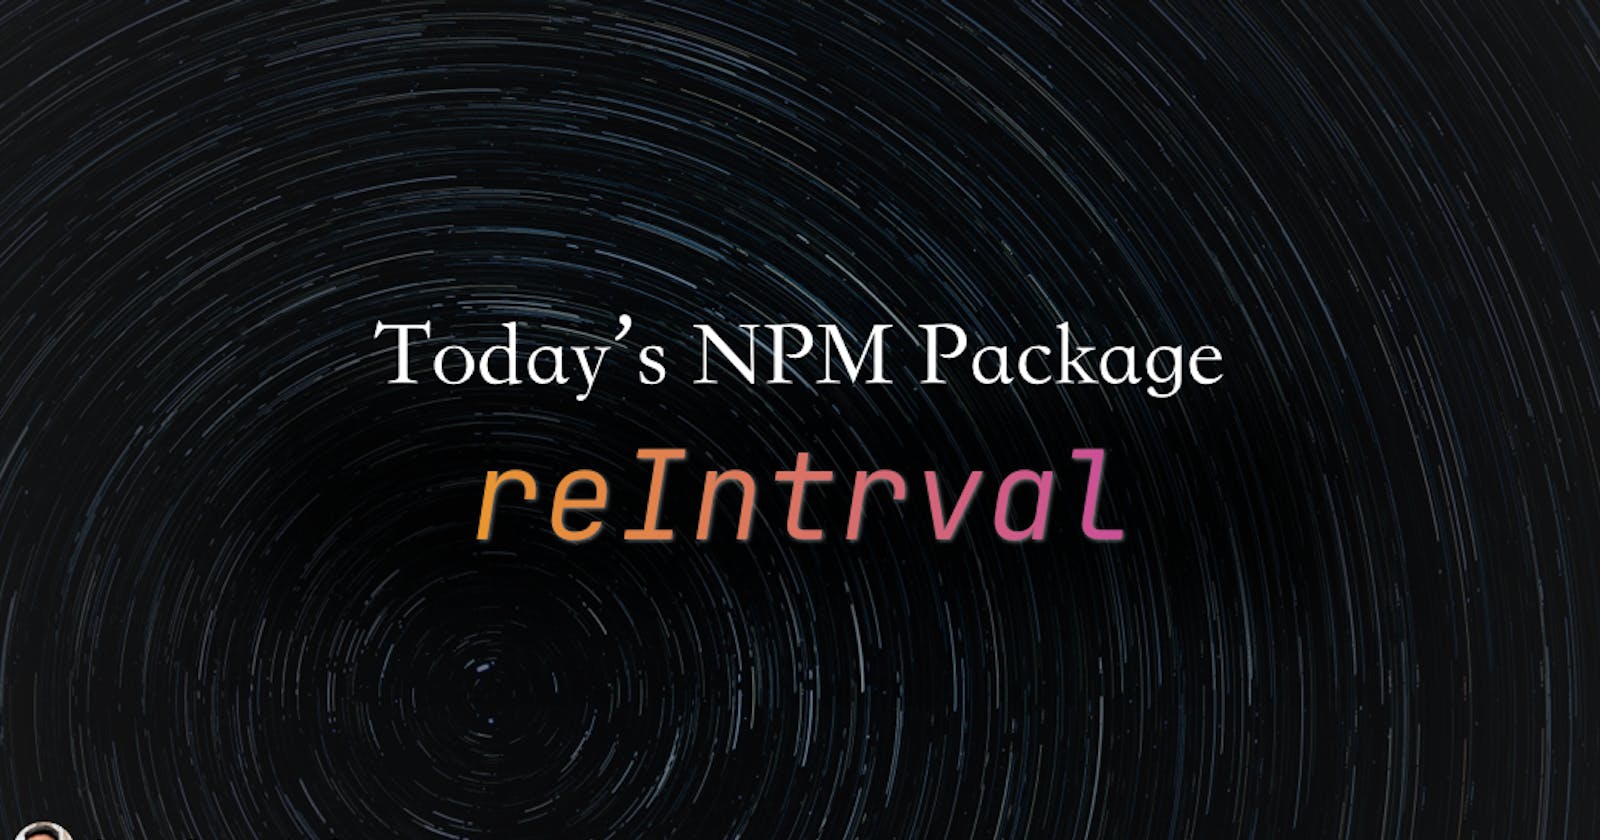 Today's npm package: reinterval